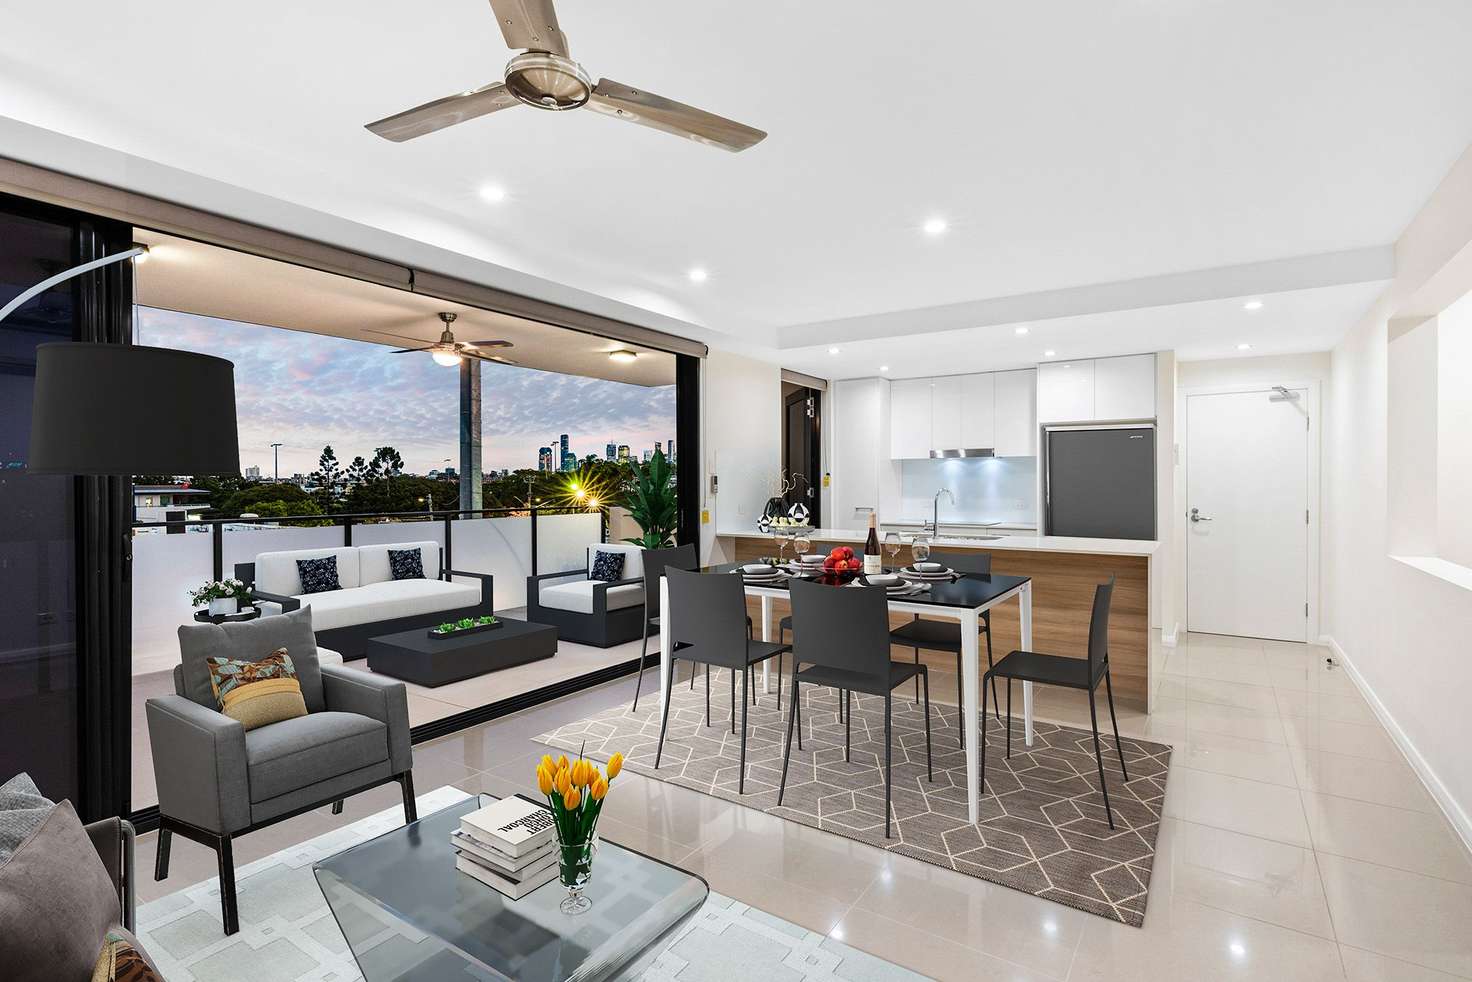 Main view of Homely apartment listing, 1/16 Wambool Street, Bulimba QLD 4171